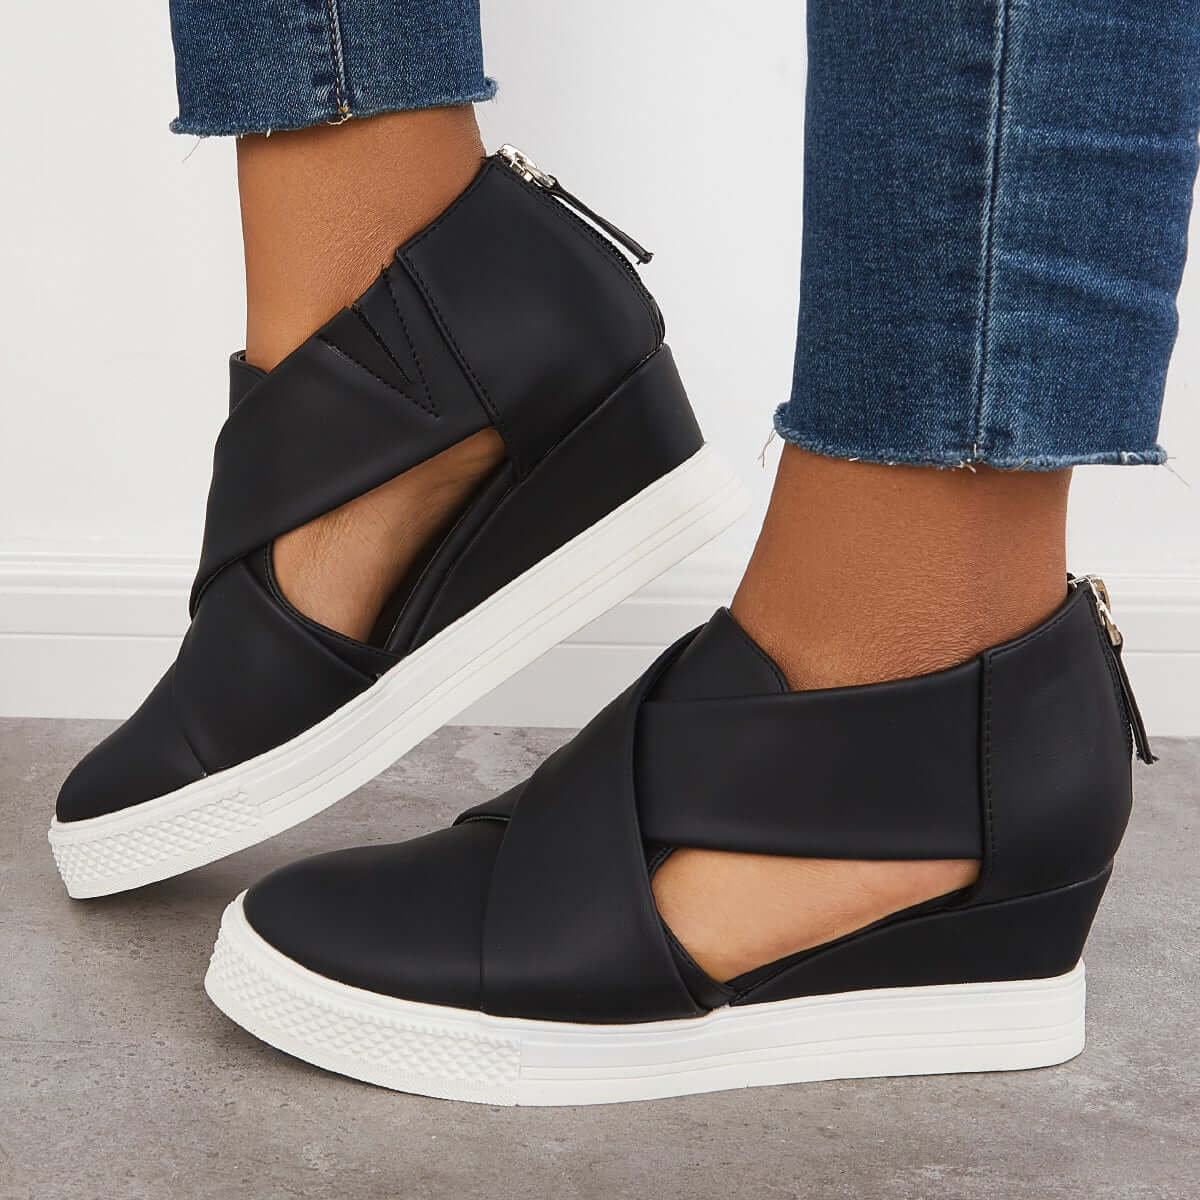 Cosylands Casual Wedge Sneakers Platform Crisscross Cut Out Shoes